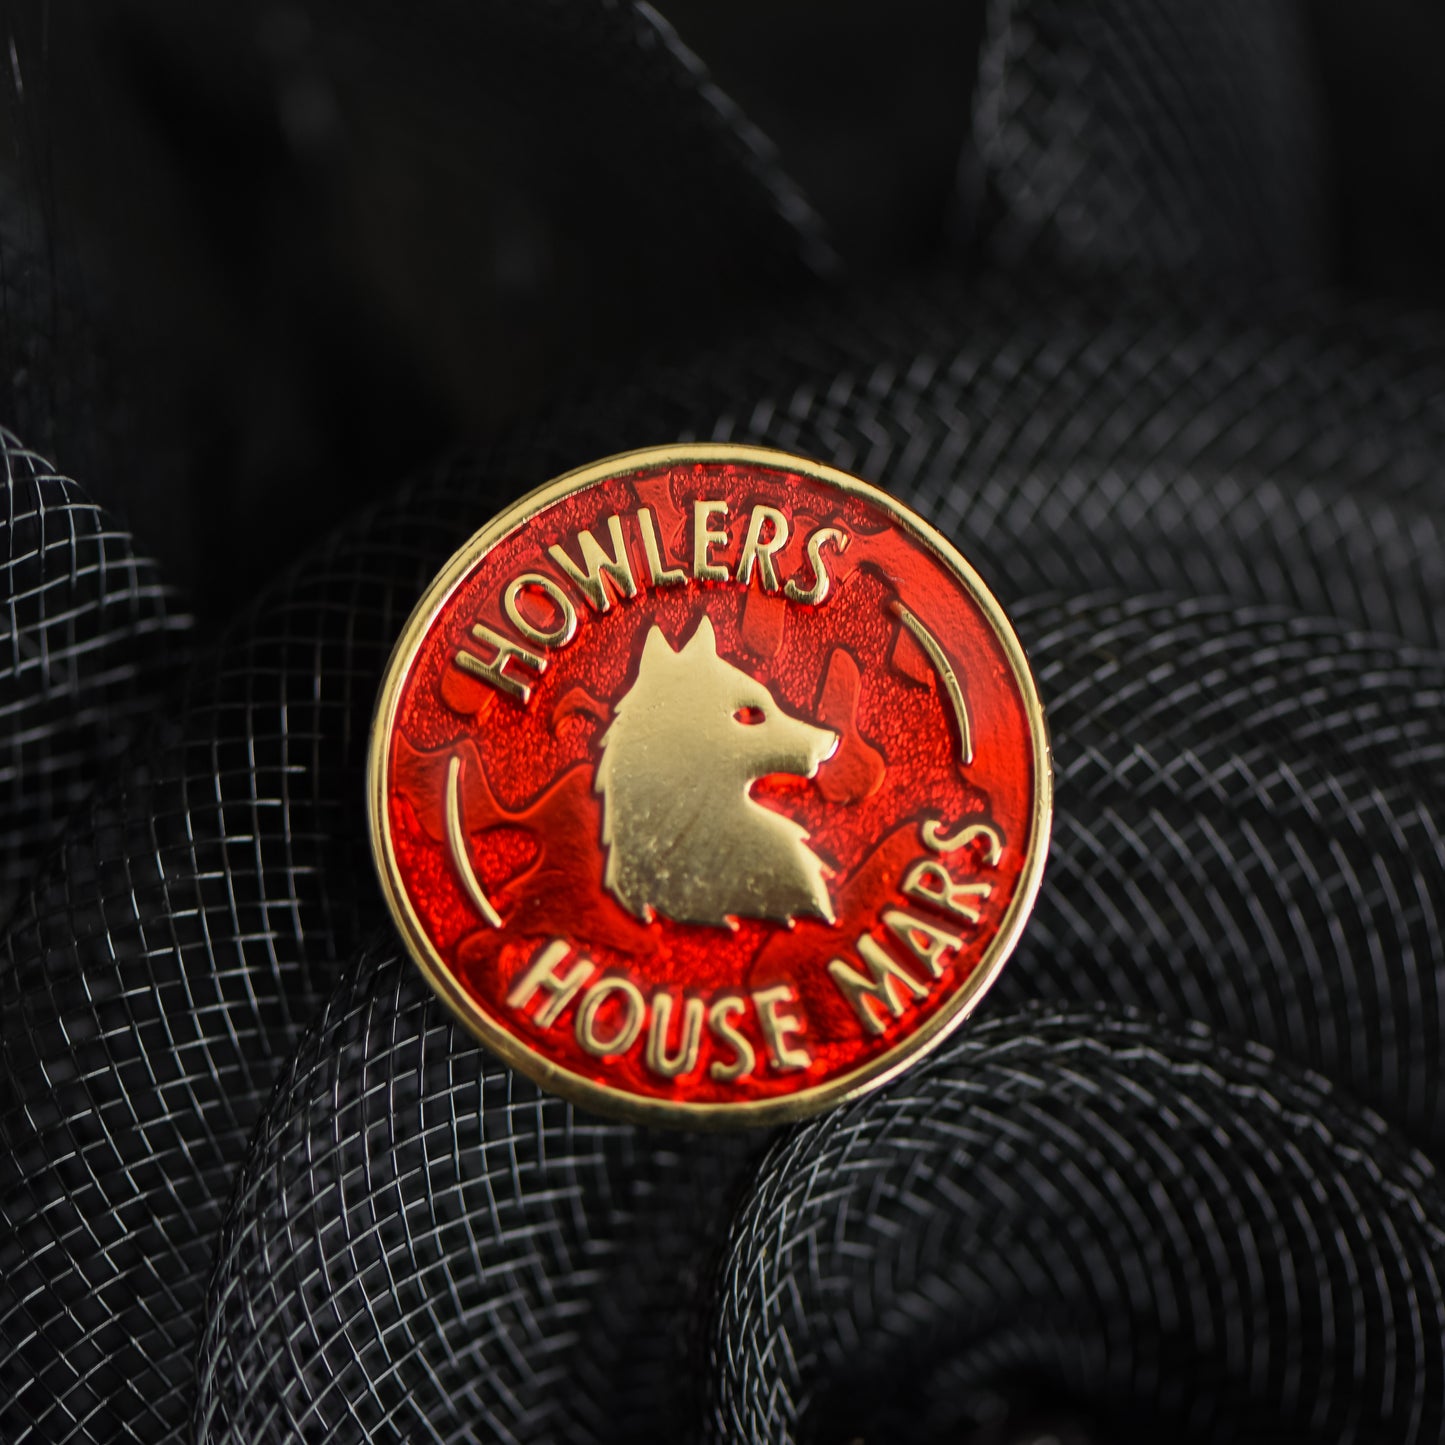 Red and gold circle membership style enamel pin with a wolf and howler house mars text